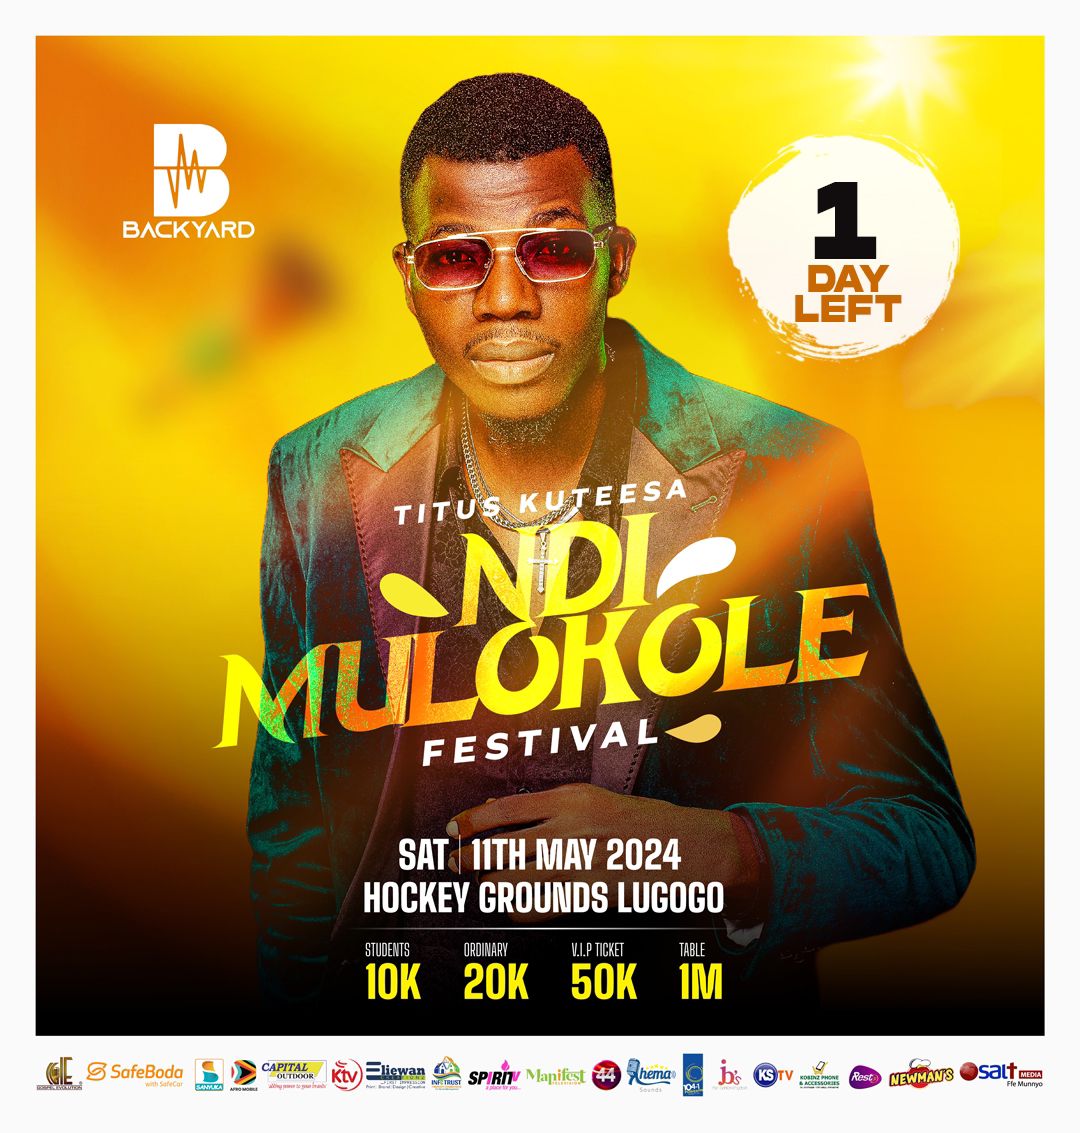 It’s only one day to Ndimulokole festival wuuuuu i’m so excited I can’t wait to see you there 🥳🥳 ##ndimulokole